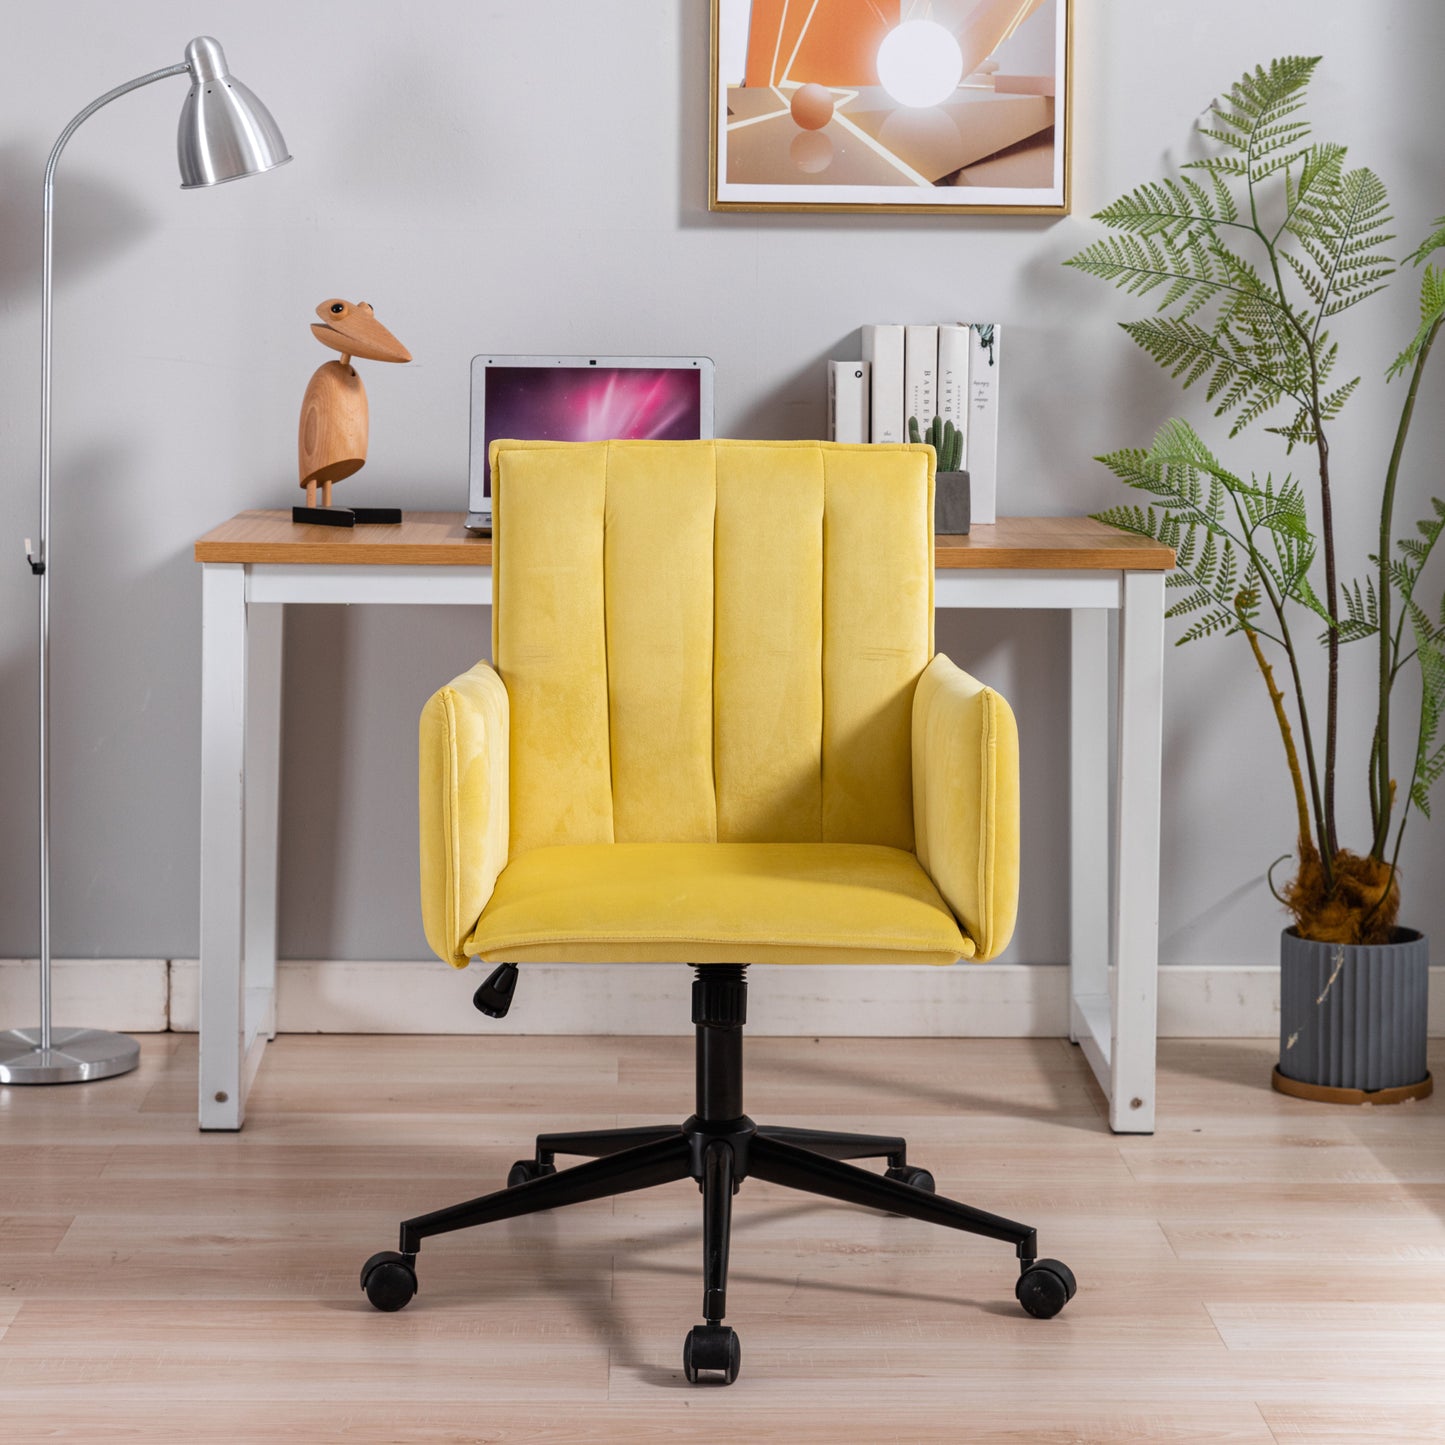 Modern Velvet Accent Chair, SYNGAR Comfy Upholstered Vanity Chair with 360 Degree Swivel, Height Adjustable Office Desk Chair, Task Chair with Soft Arm and Back for Home, Office, Yellow, Y030